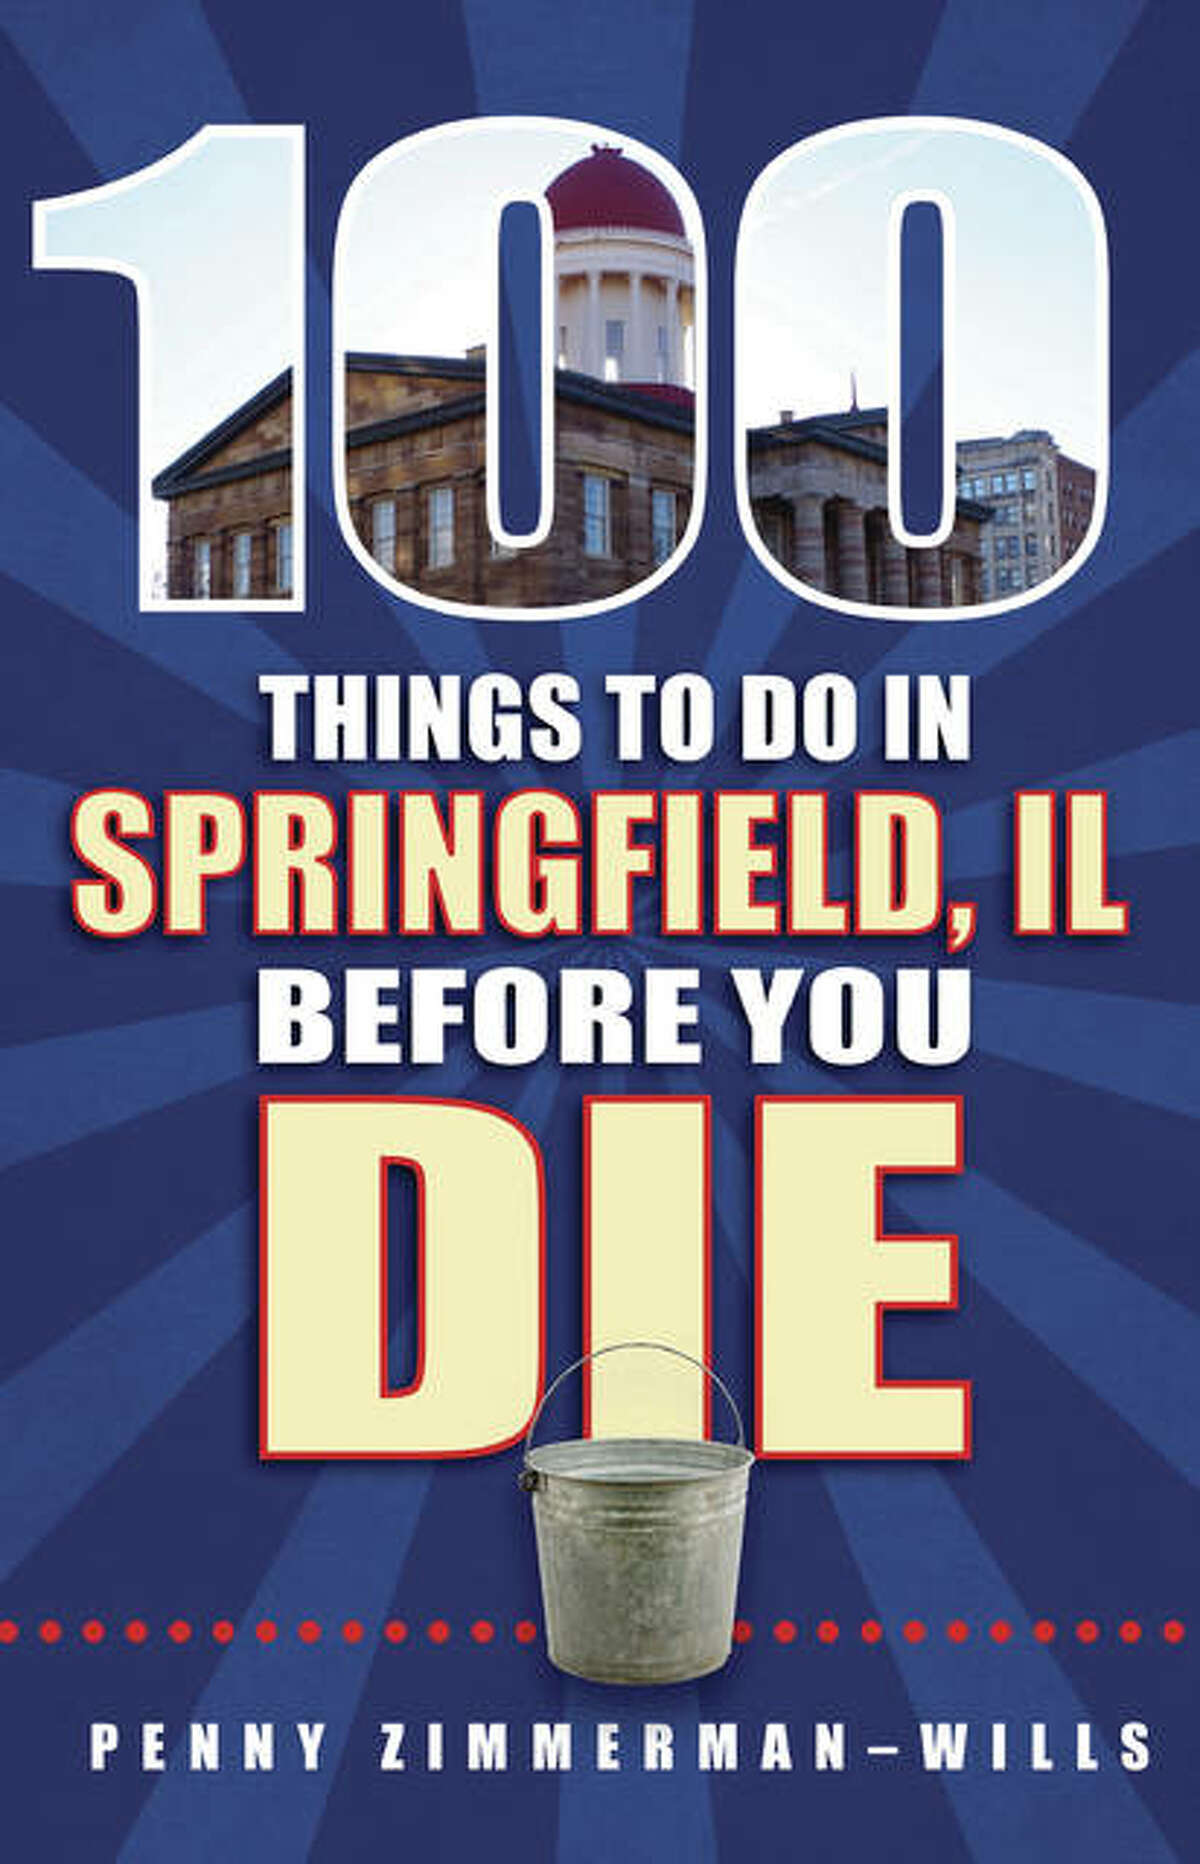 “100 Things To Do In Springfield, IL Before You Die” is available at www.barnesandnoble.com, www.amazon.com and various retailers around Springfield.